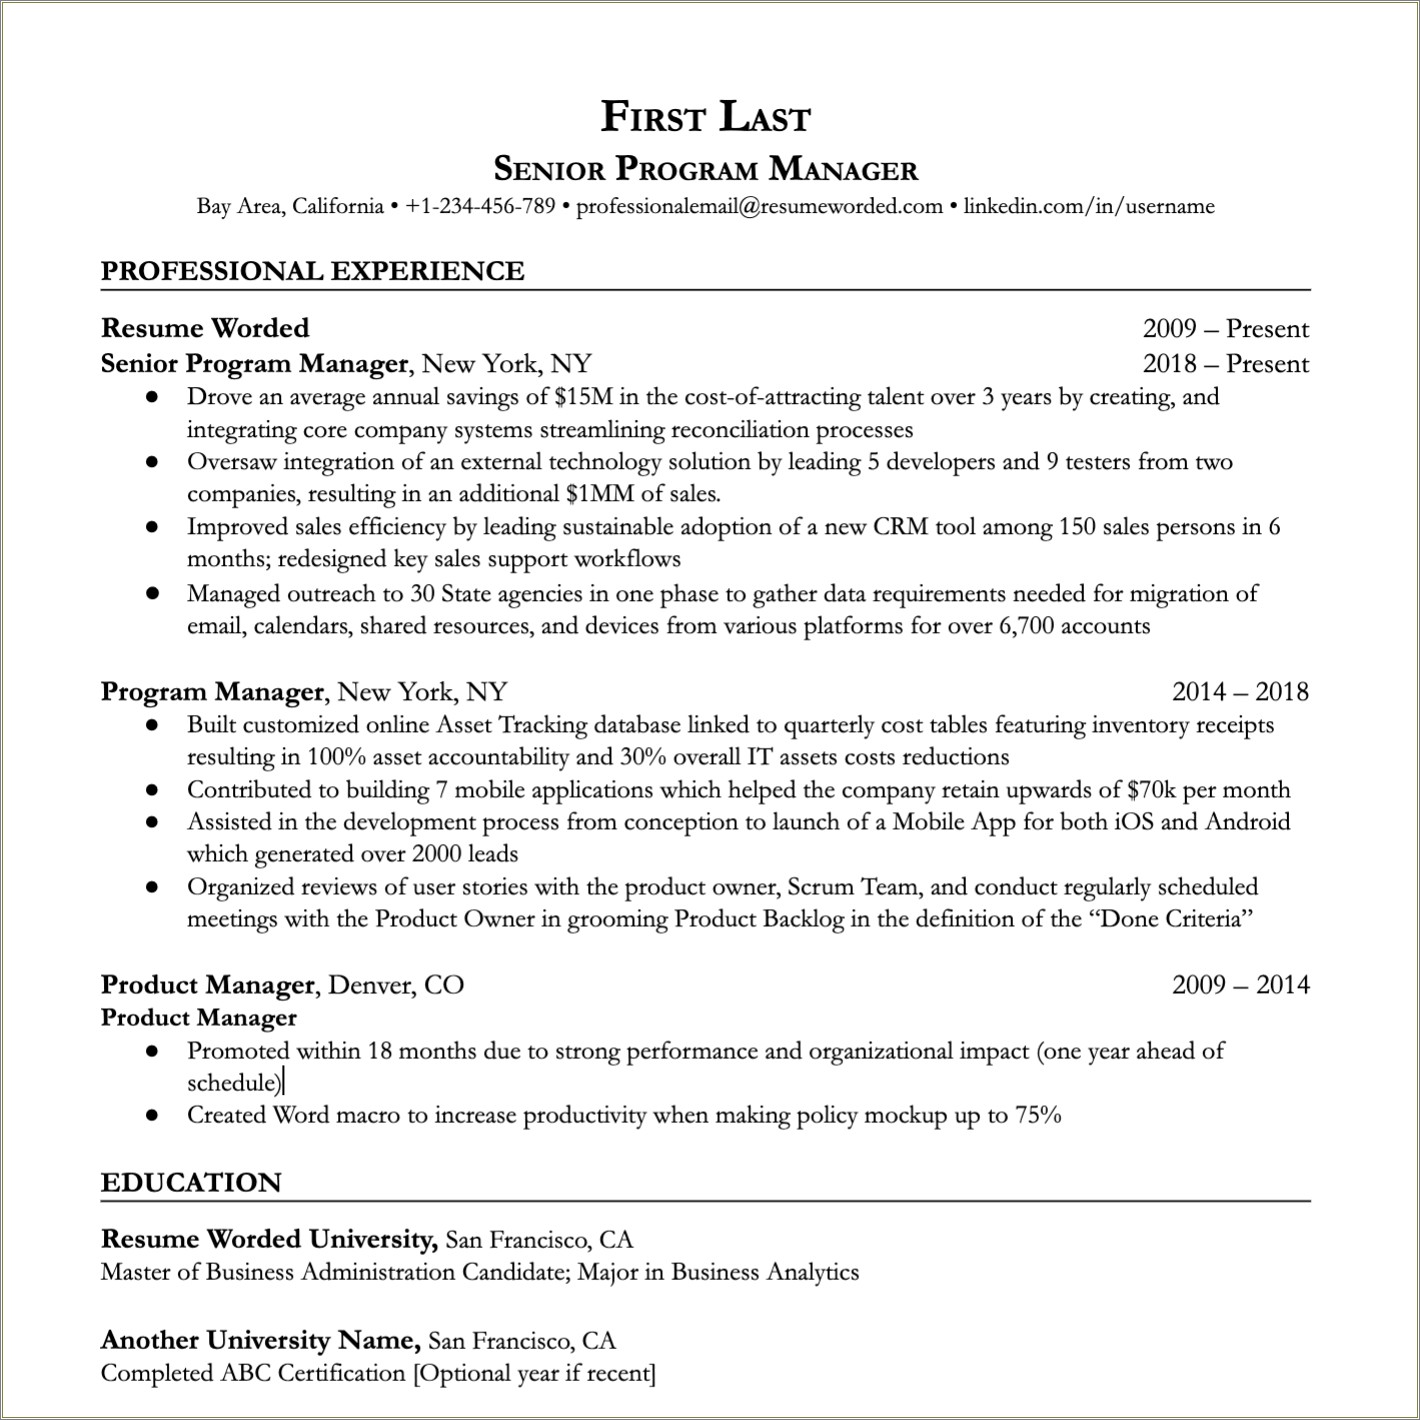 Proper Way To List Work Experience On Resume